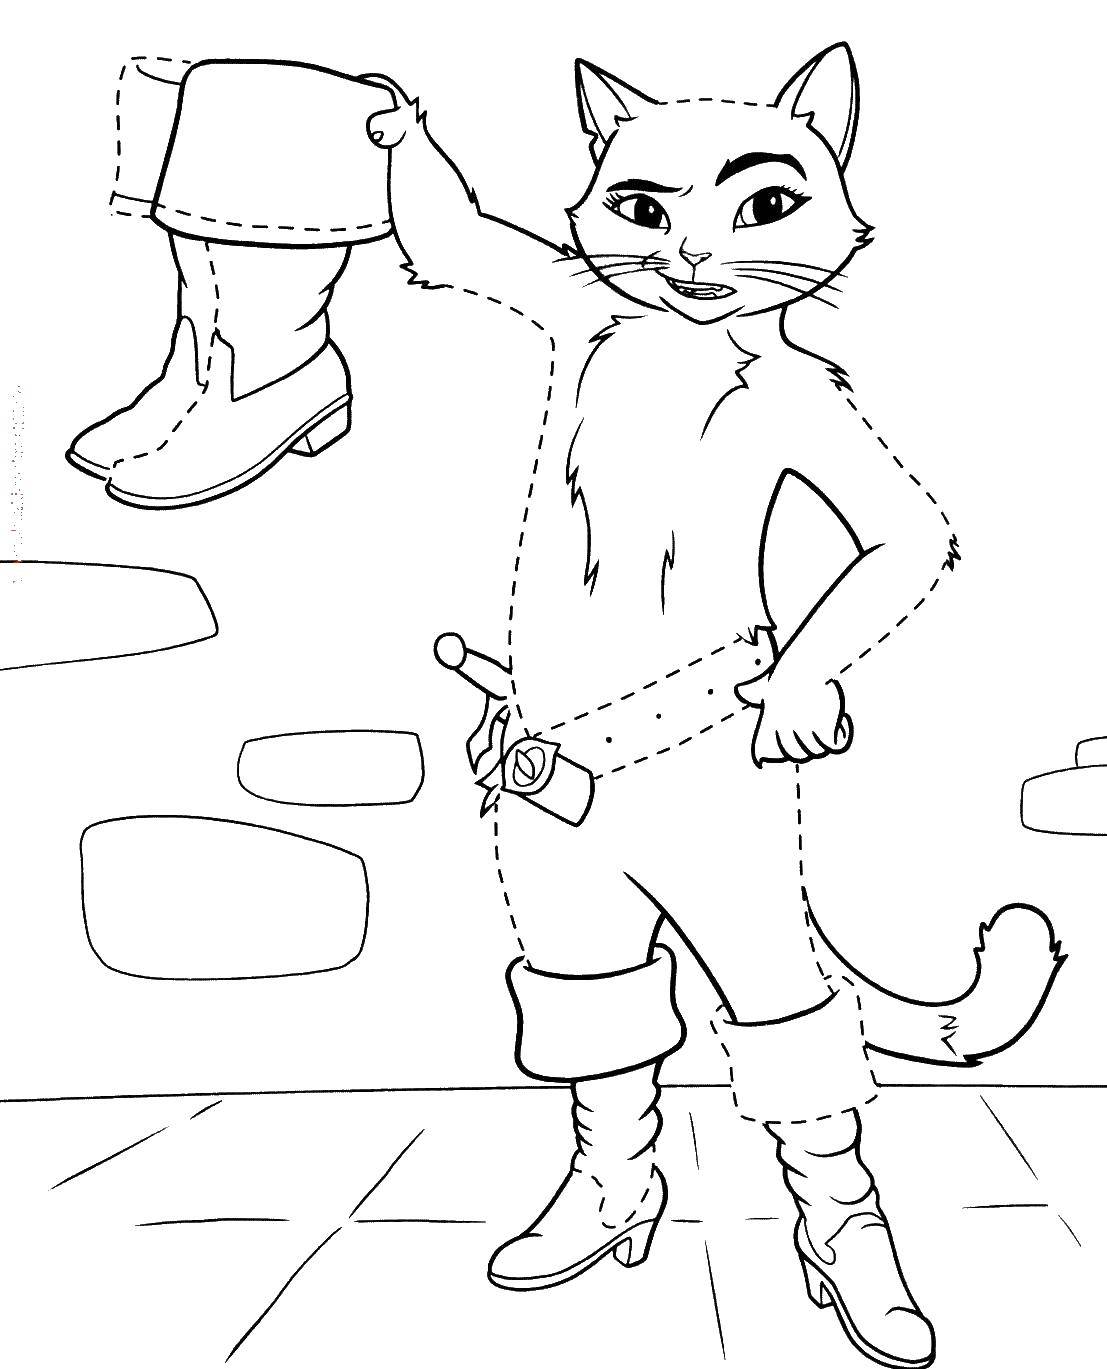 Coloring Puss in boots. Category the character of the tale. Tags:  cat, boots.